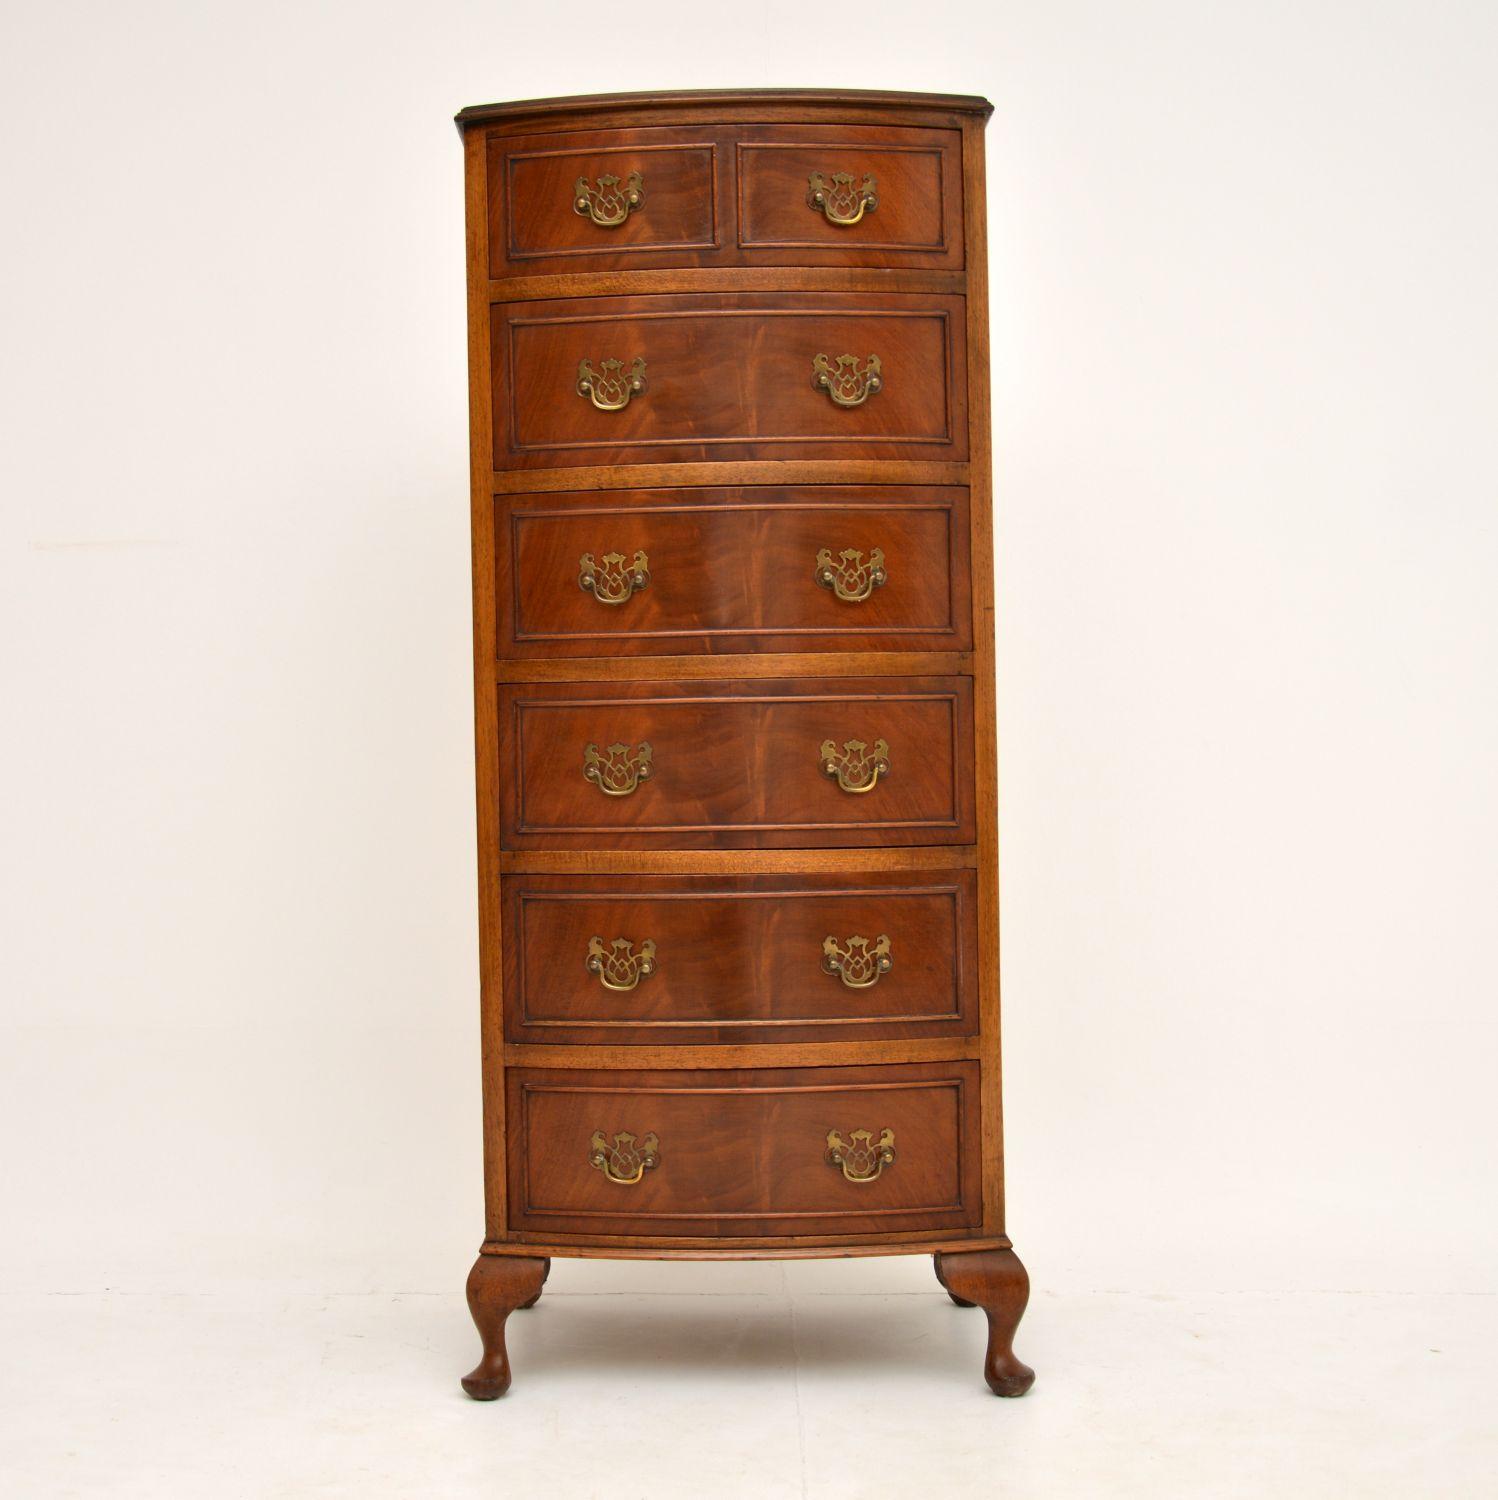 A beautiful slim bow front mahogany chest of drawers. This is in the antique Georgian style & I believe it dates from circa 1930s period.

It is a very useful size, offering lots of storage space while not taking up much floor space. The quality